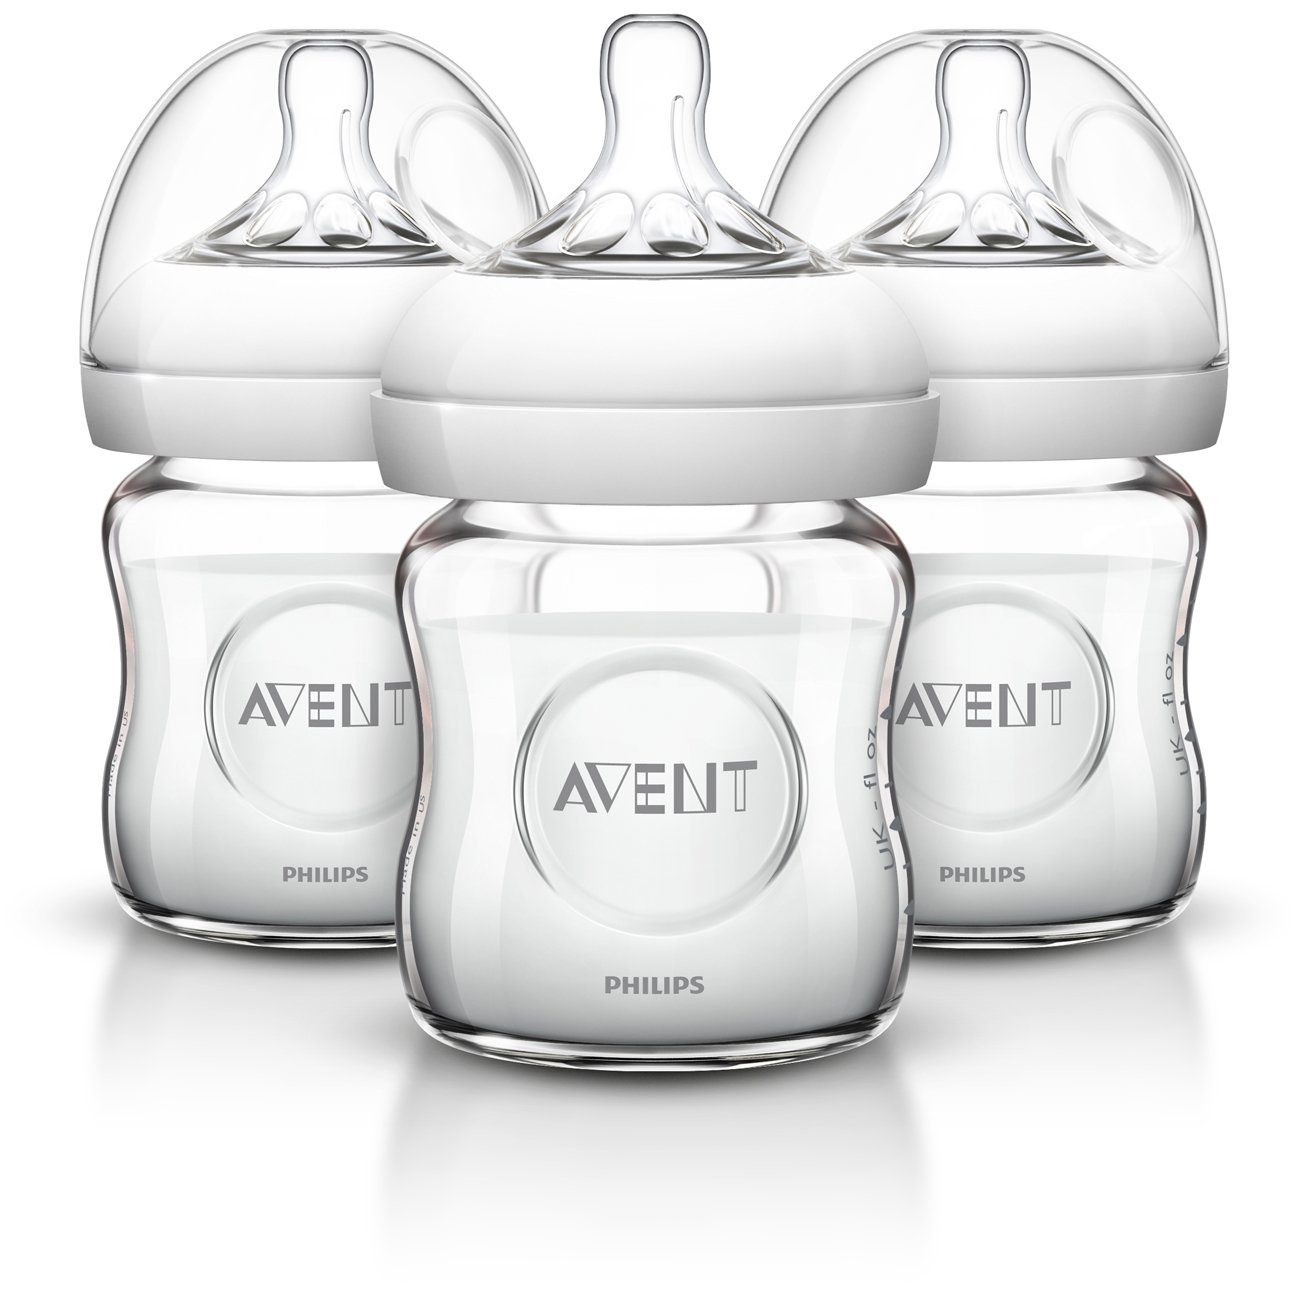 Top 4 Best Natural Baby Bottles Reviews in 2023 2